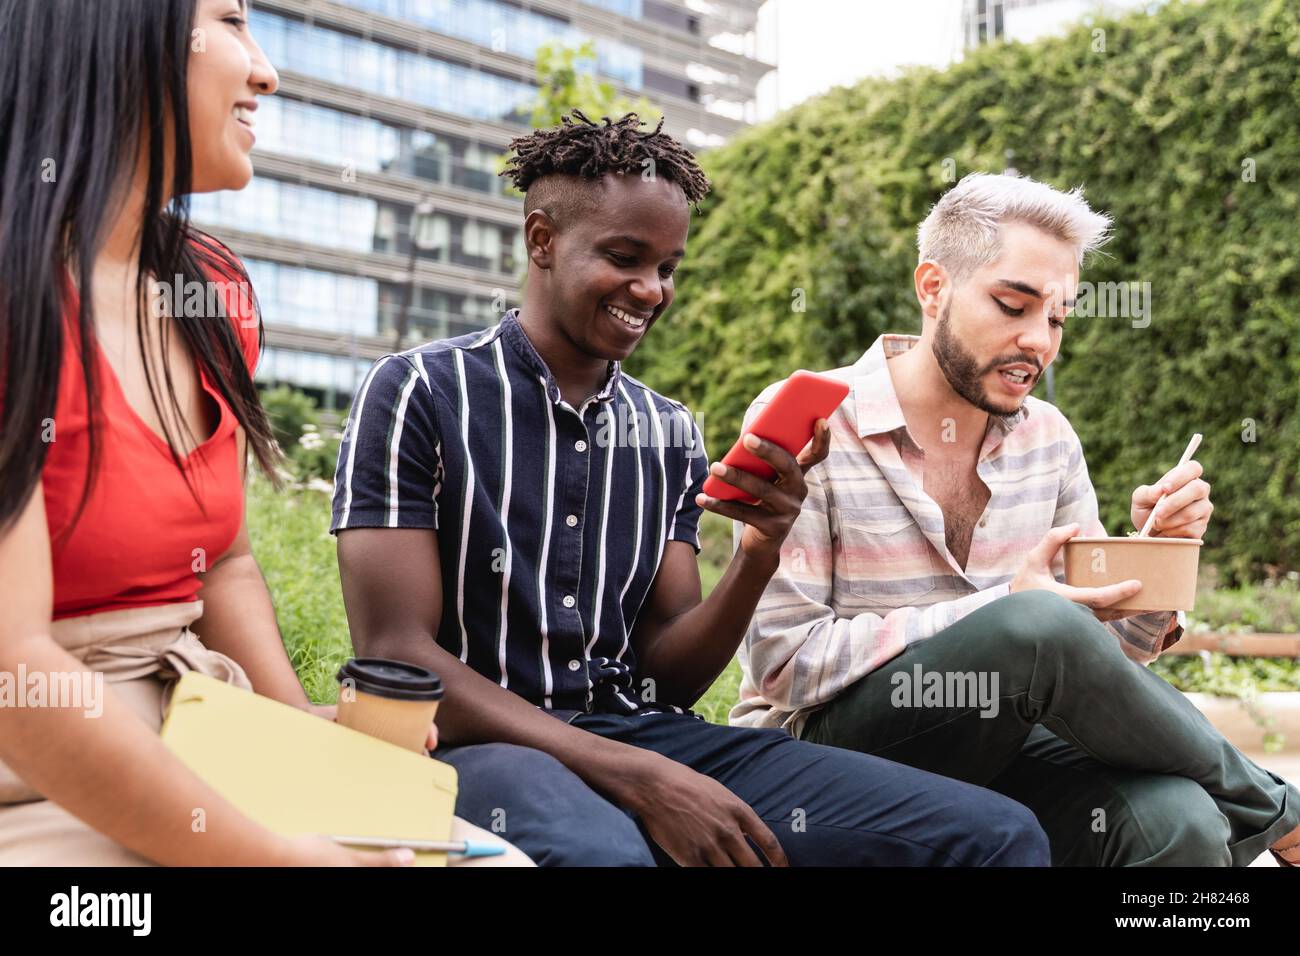 Diverse people having fun eating takeaway food outdoor in the city - Focus on non-binary man Stock Photo